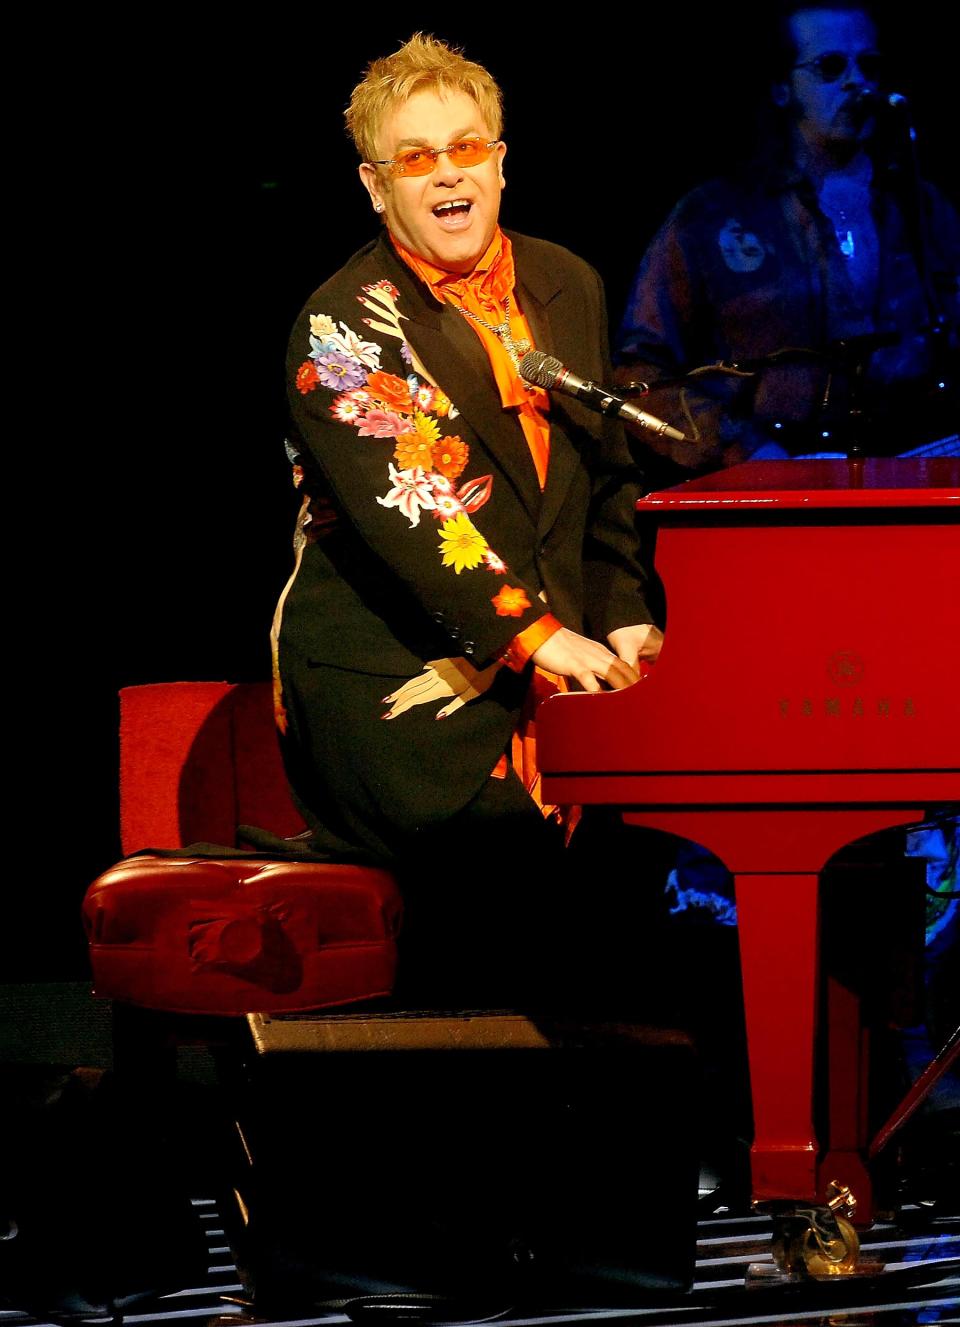 2008 - 200th performance of The Red Piano in Las Vegas